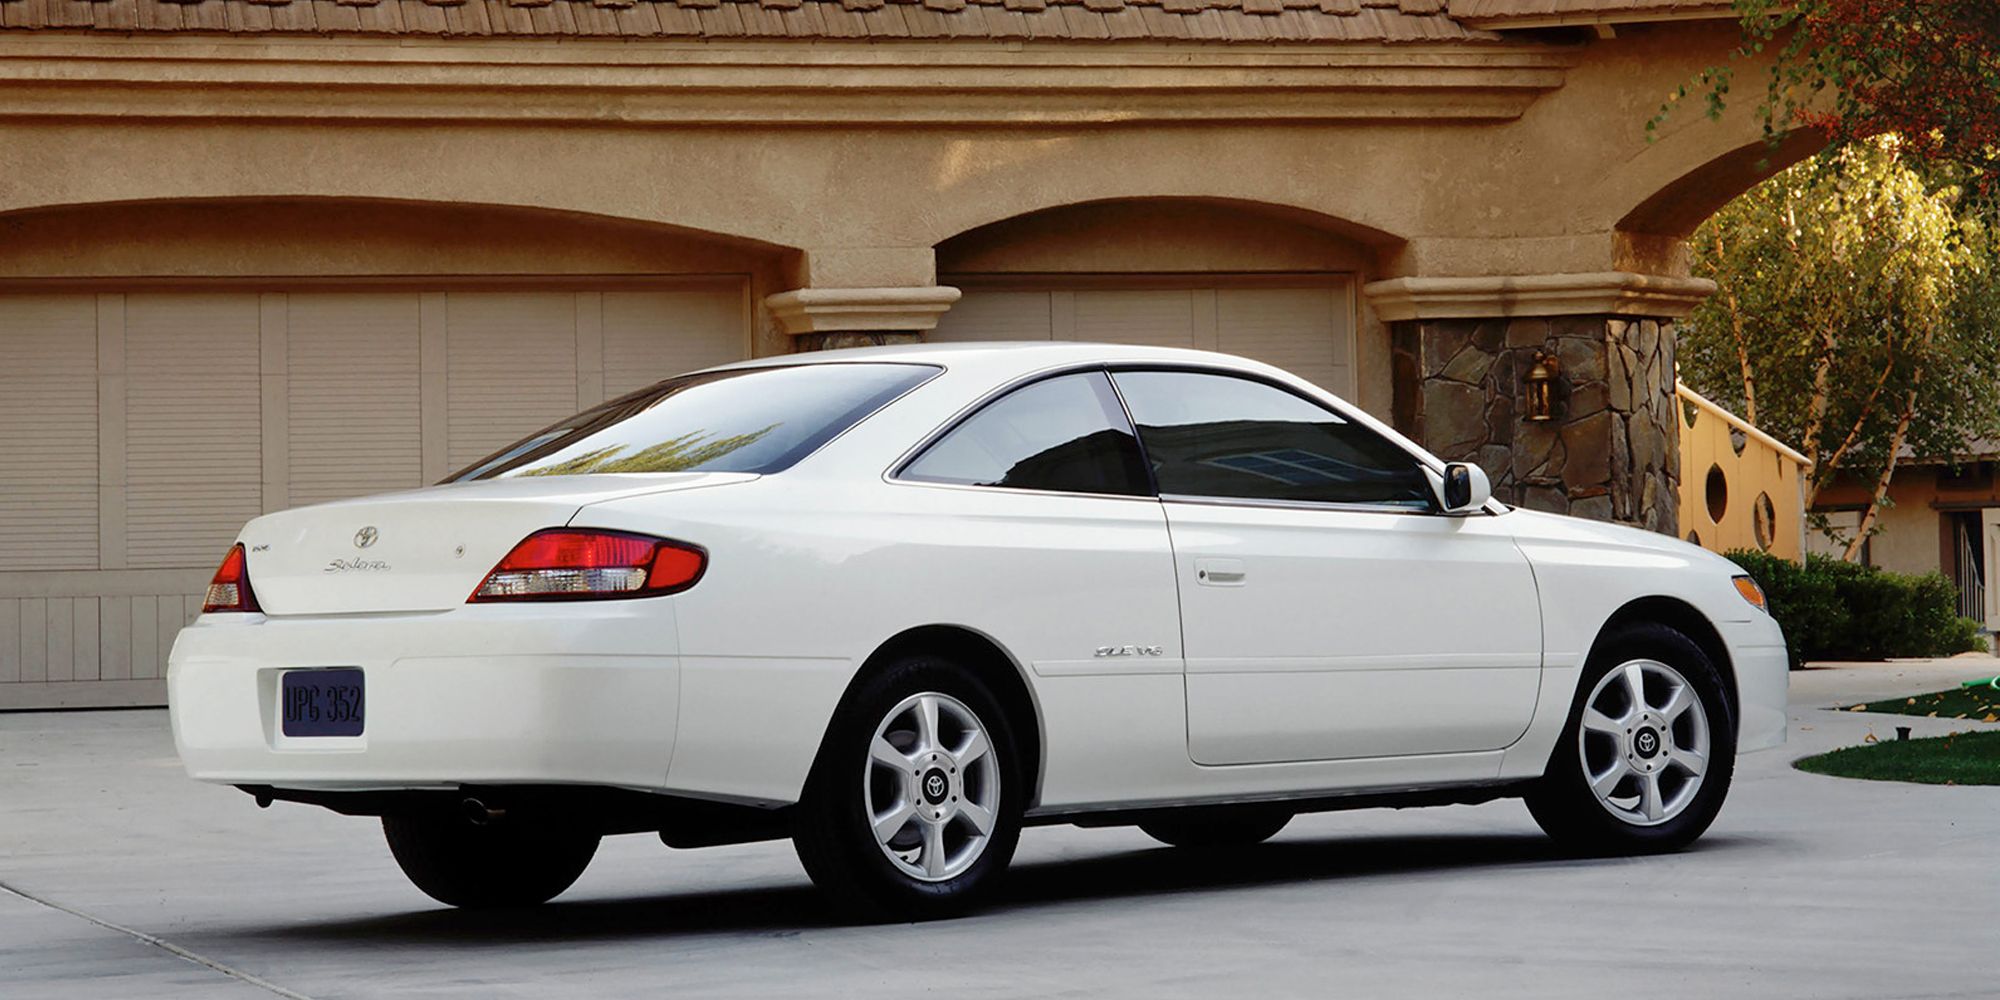 Rear 3/4 view of the Camry Solara